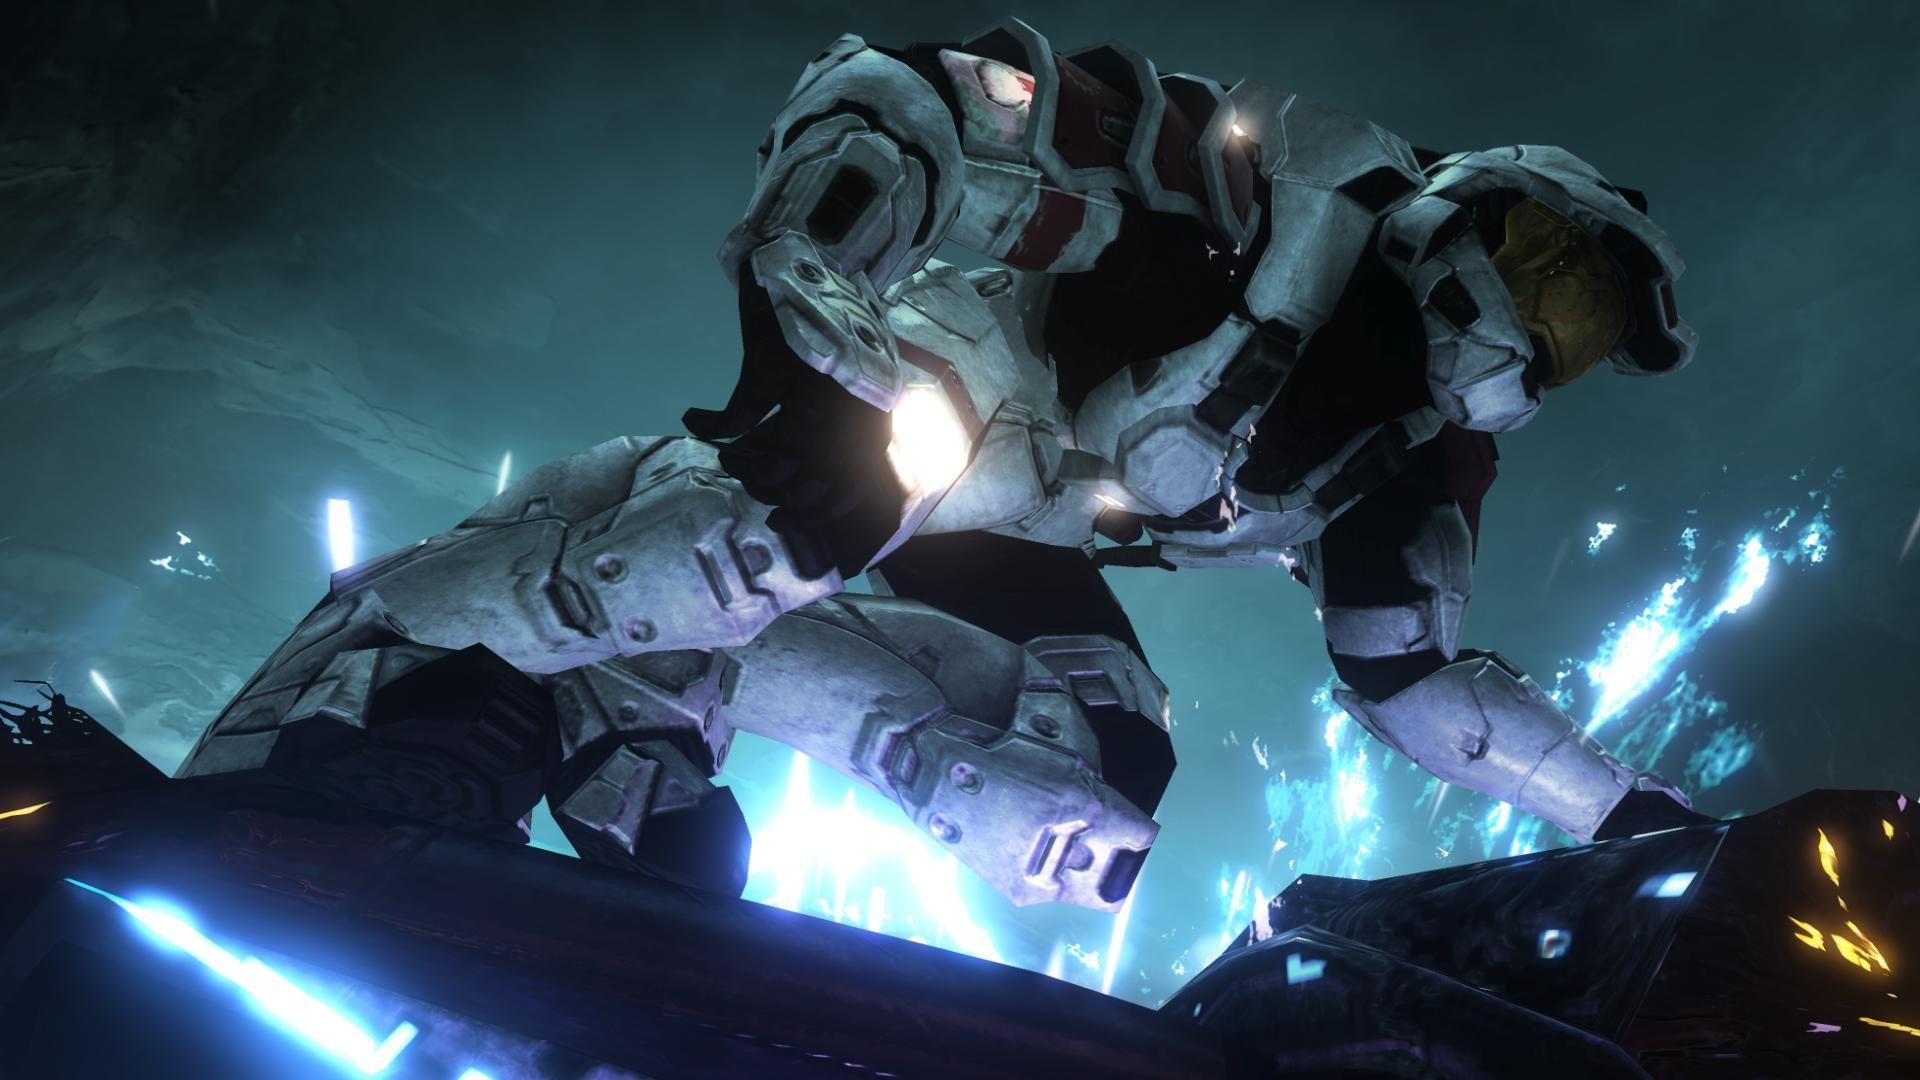 Halo Wallpapers HD 1080p - Wallpaper Cave